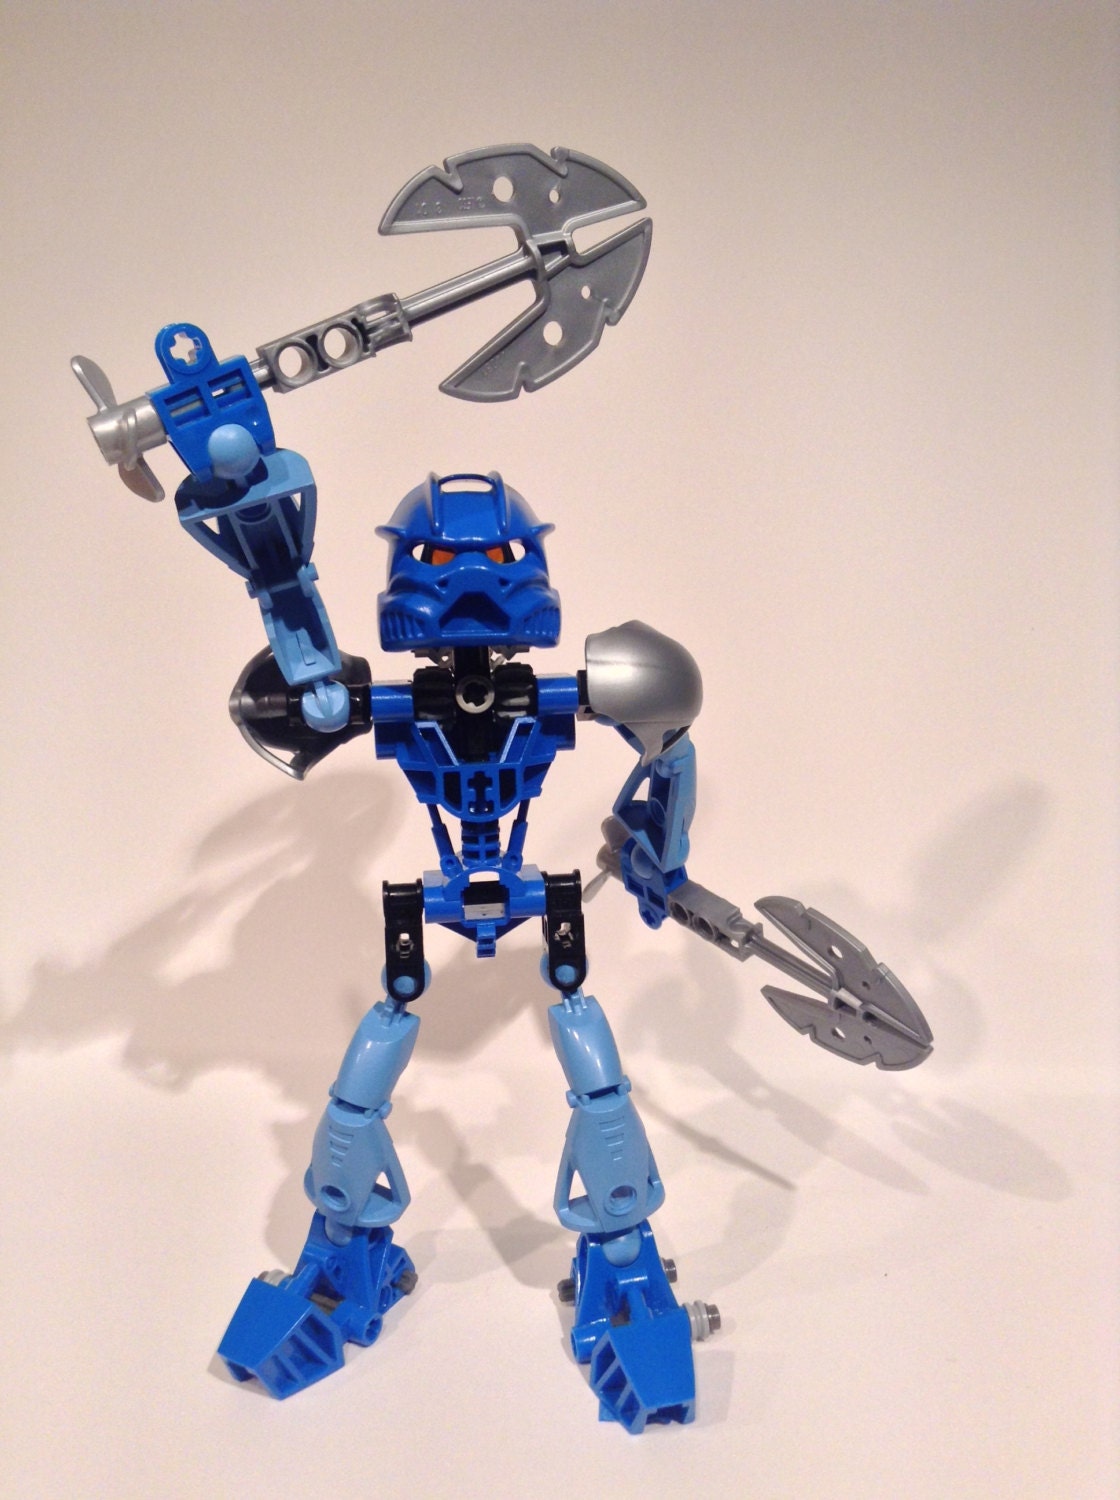 Vintage Lego Bionicle Toa Gali Nuva Rebuild By Verbaniagames 55860 Hot Sex Picture